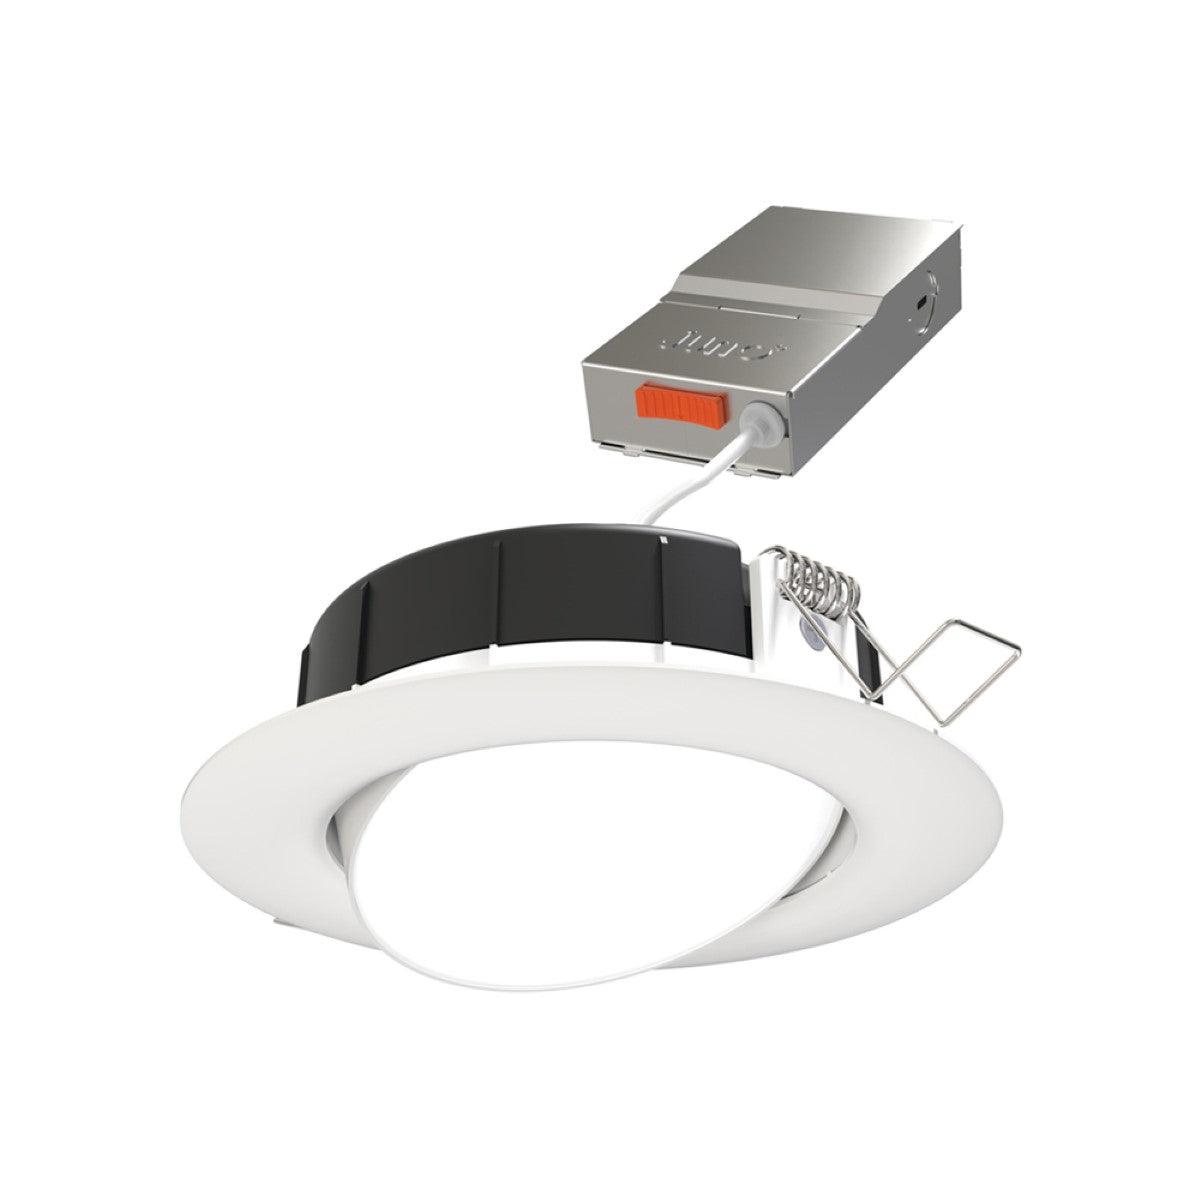 4 in. Wafer Adjustable LED Recessed Light, 700 Lumens ,Selectable CCT, 2700K to 5000K, White Finish - Bees Lighting